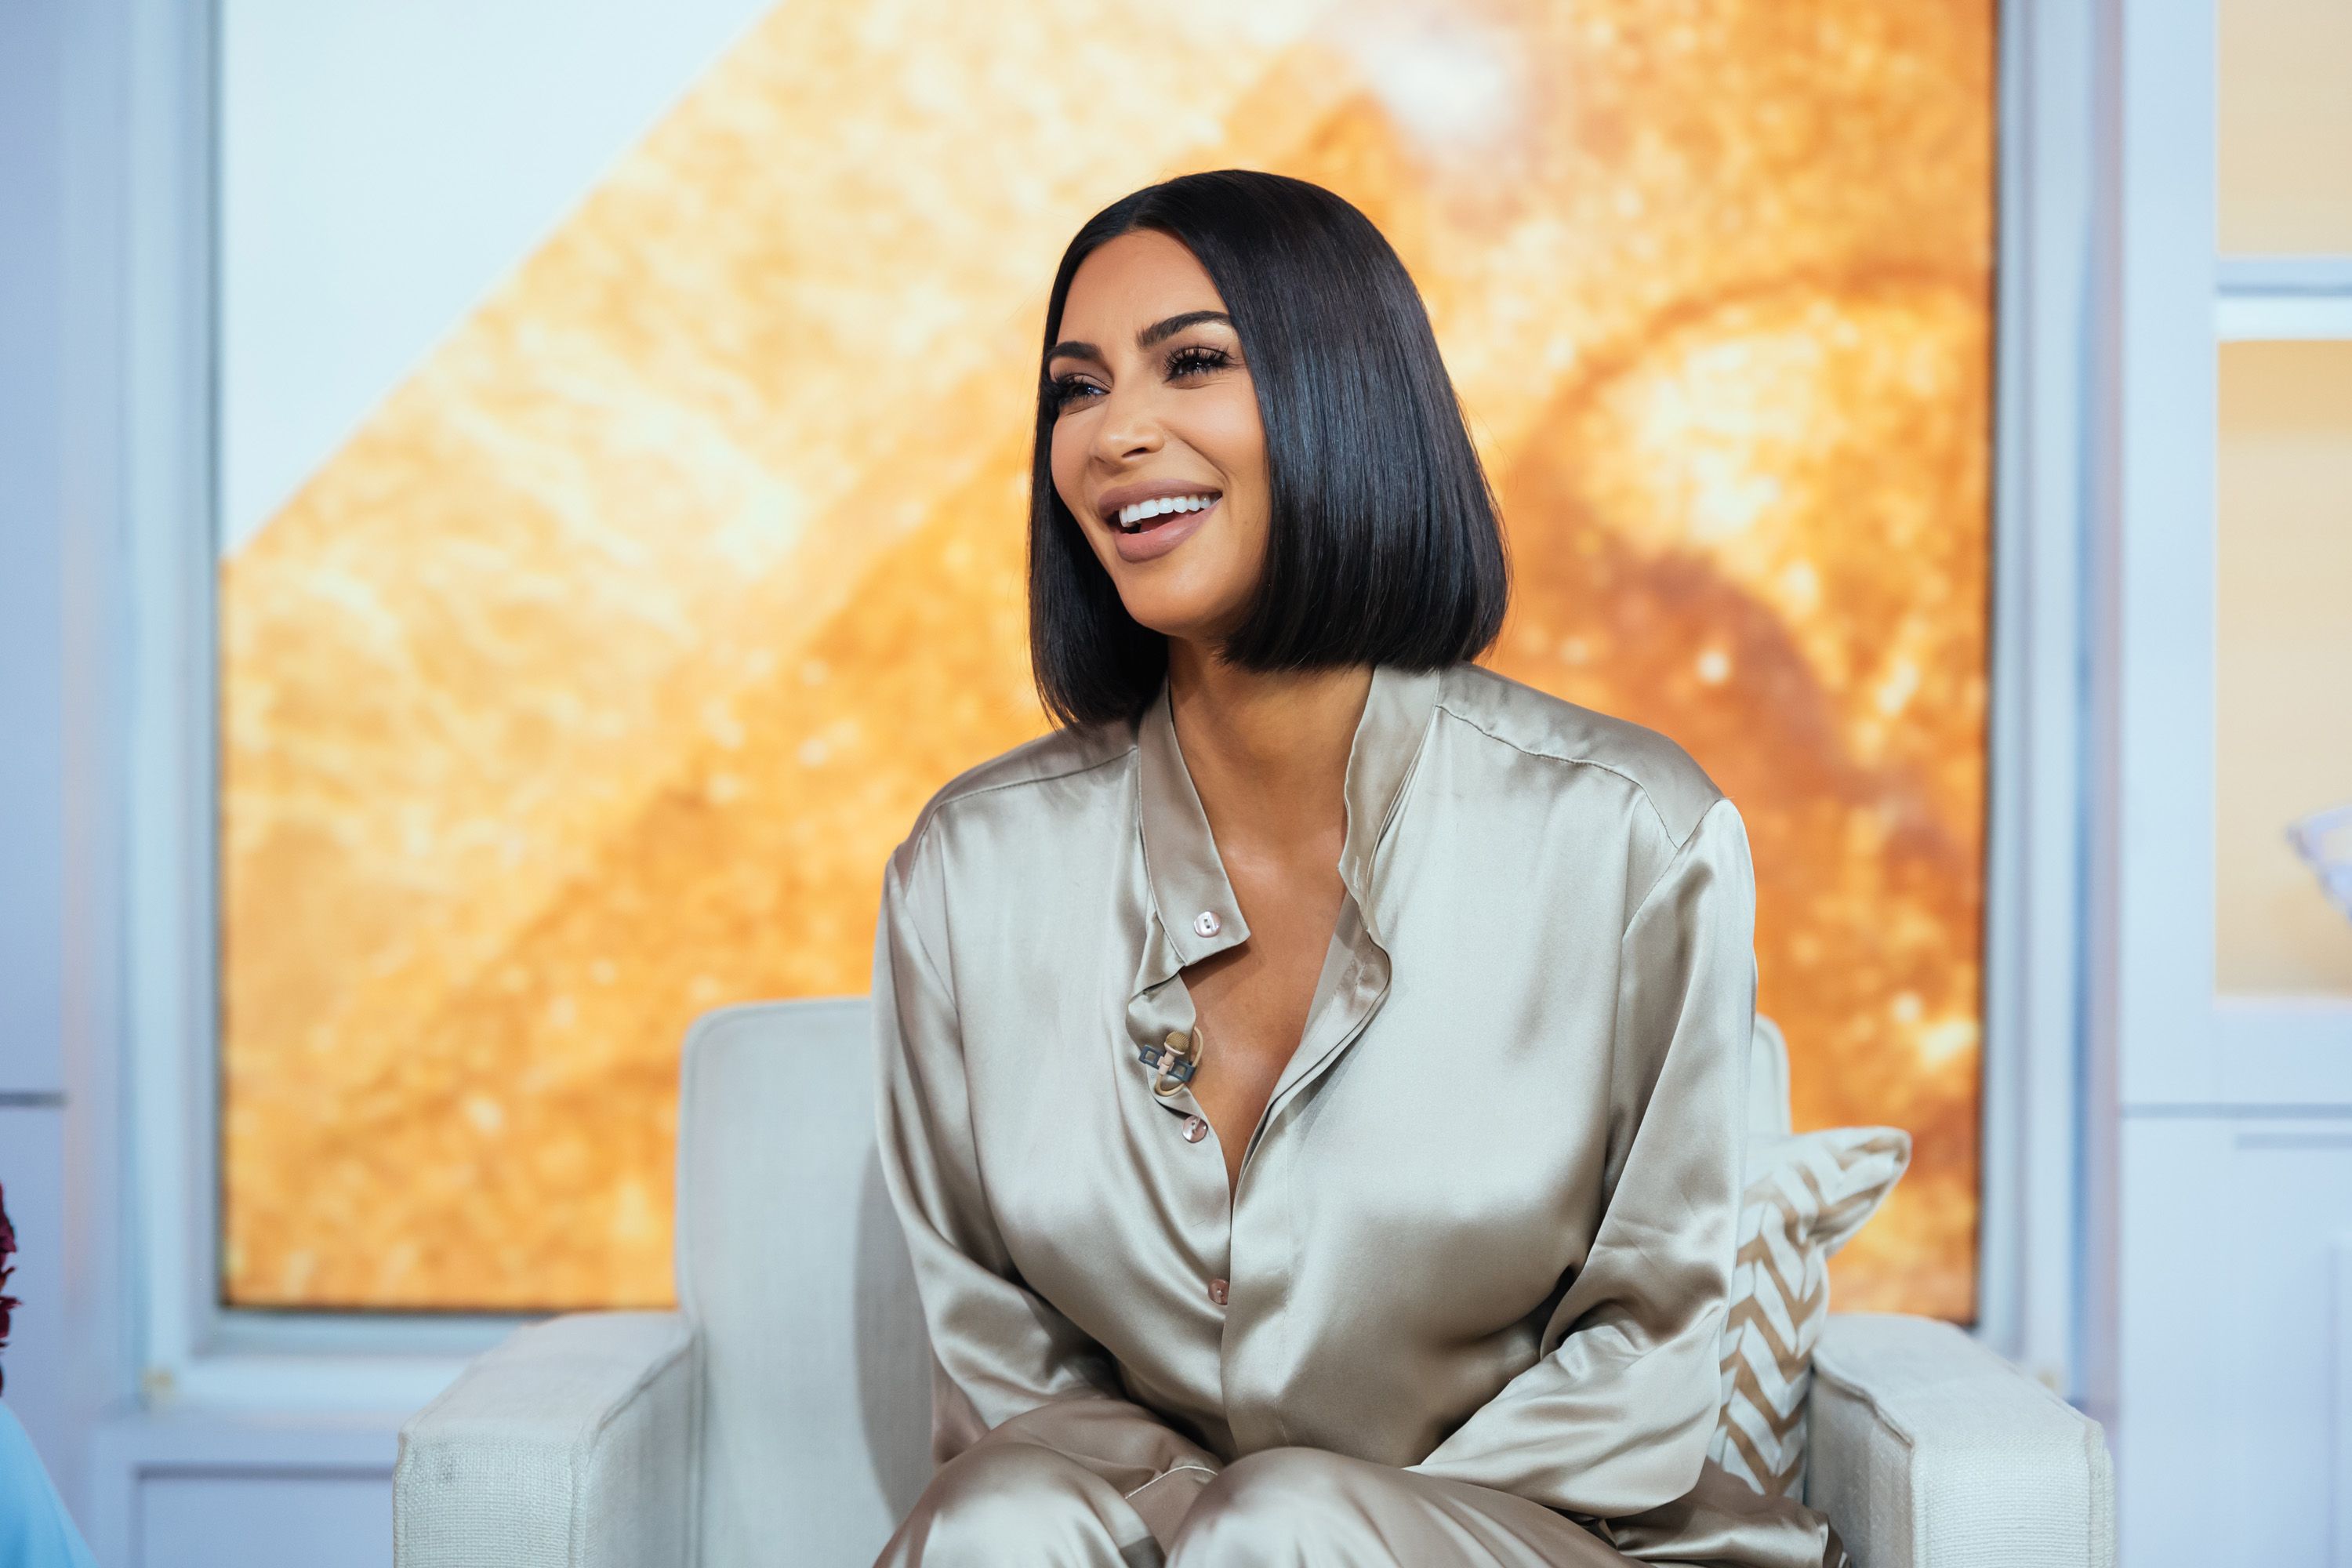 Kim Kardashian West at Today - Season 68 TODAY on Tuesday, September 10, 2019 | Photo: Getty Images